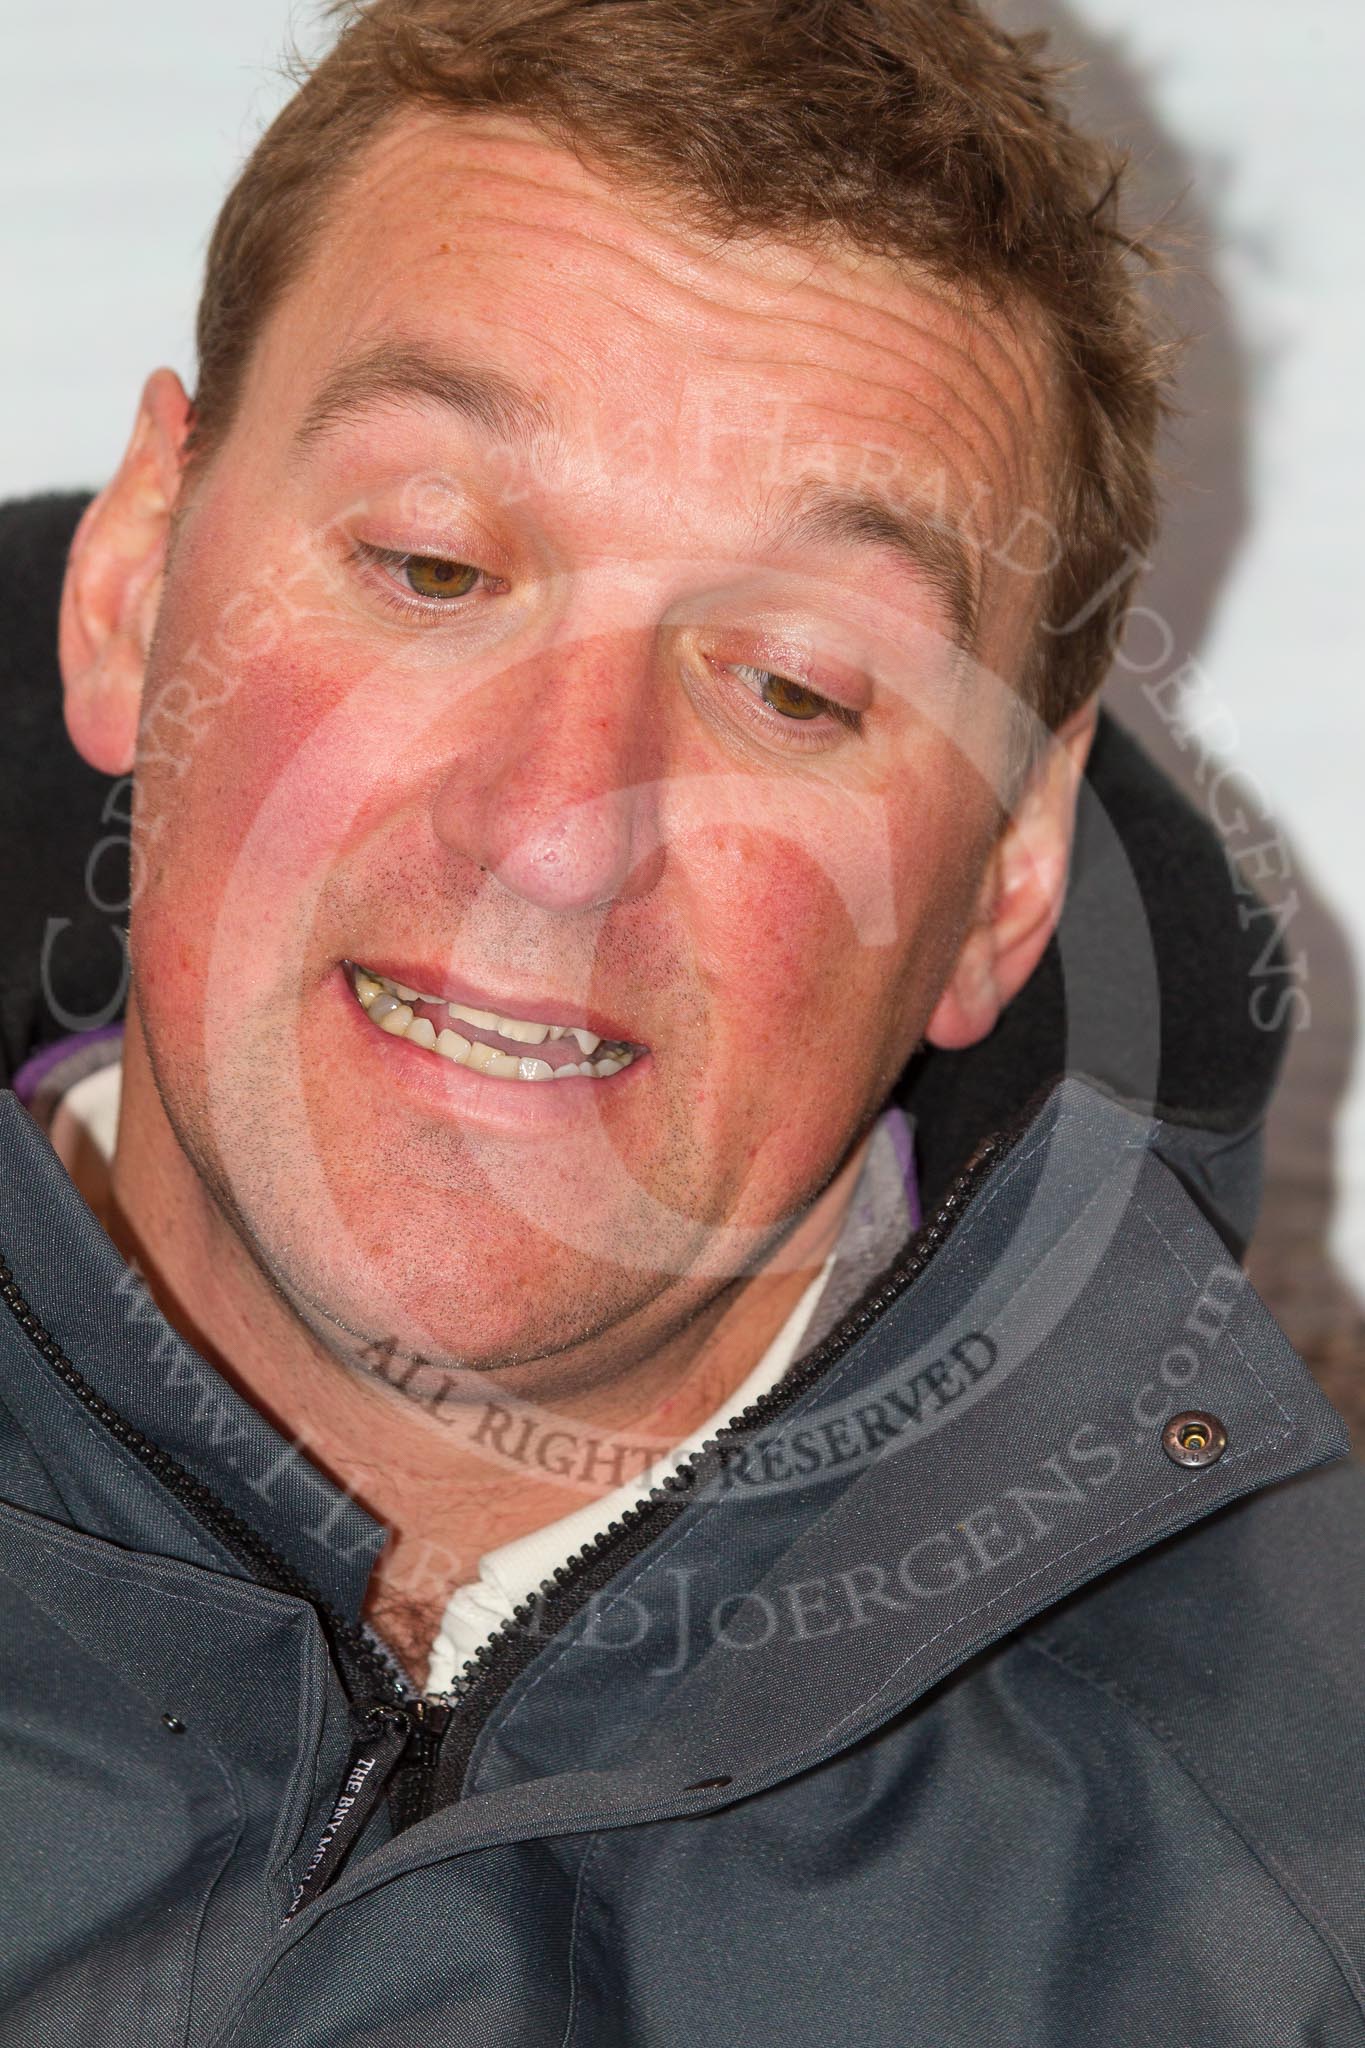 The Boat Race season 2013 -  Tideway Week (Friday) and press conferences: At the umpires press conference - Blue Boat race umpire Sir Matthew Pinsent..
River Thames,
London SW15,

United Kingdom,
on 29 March 2013 at 15:49, image #159